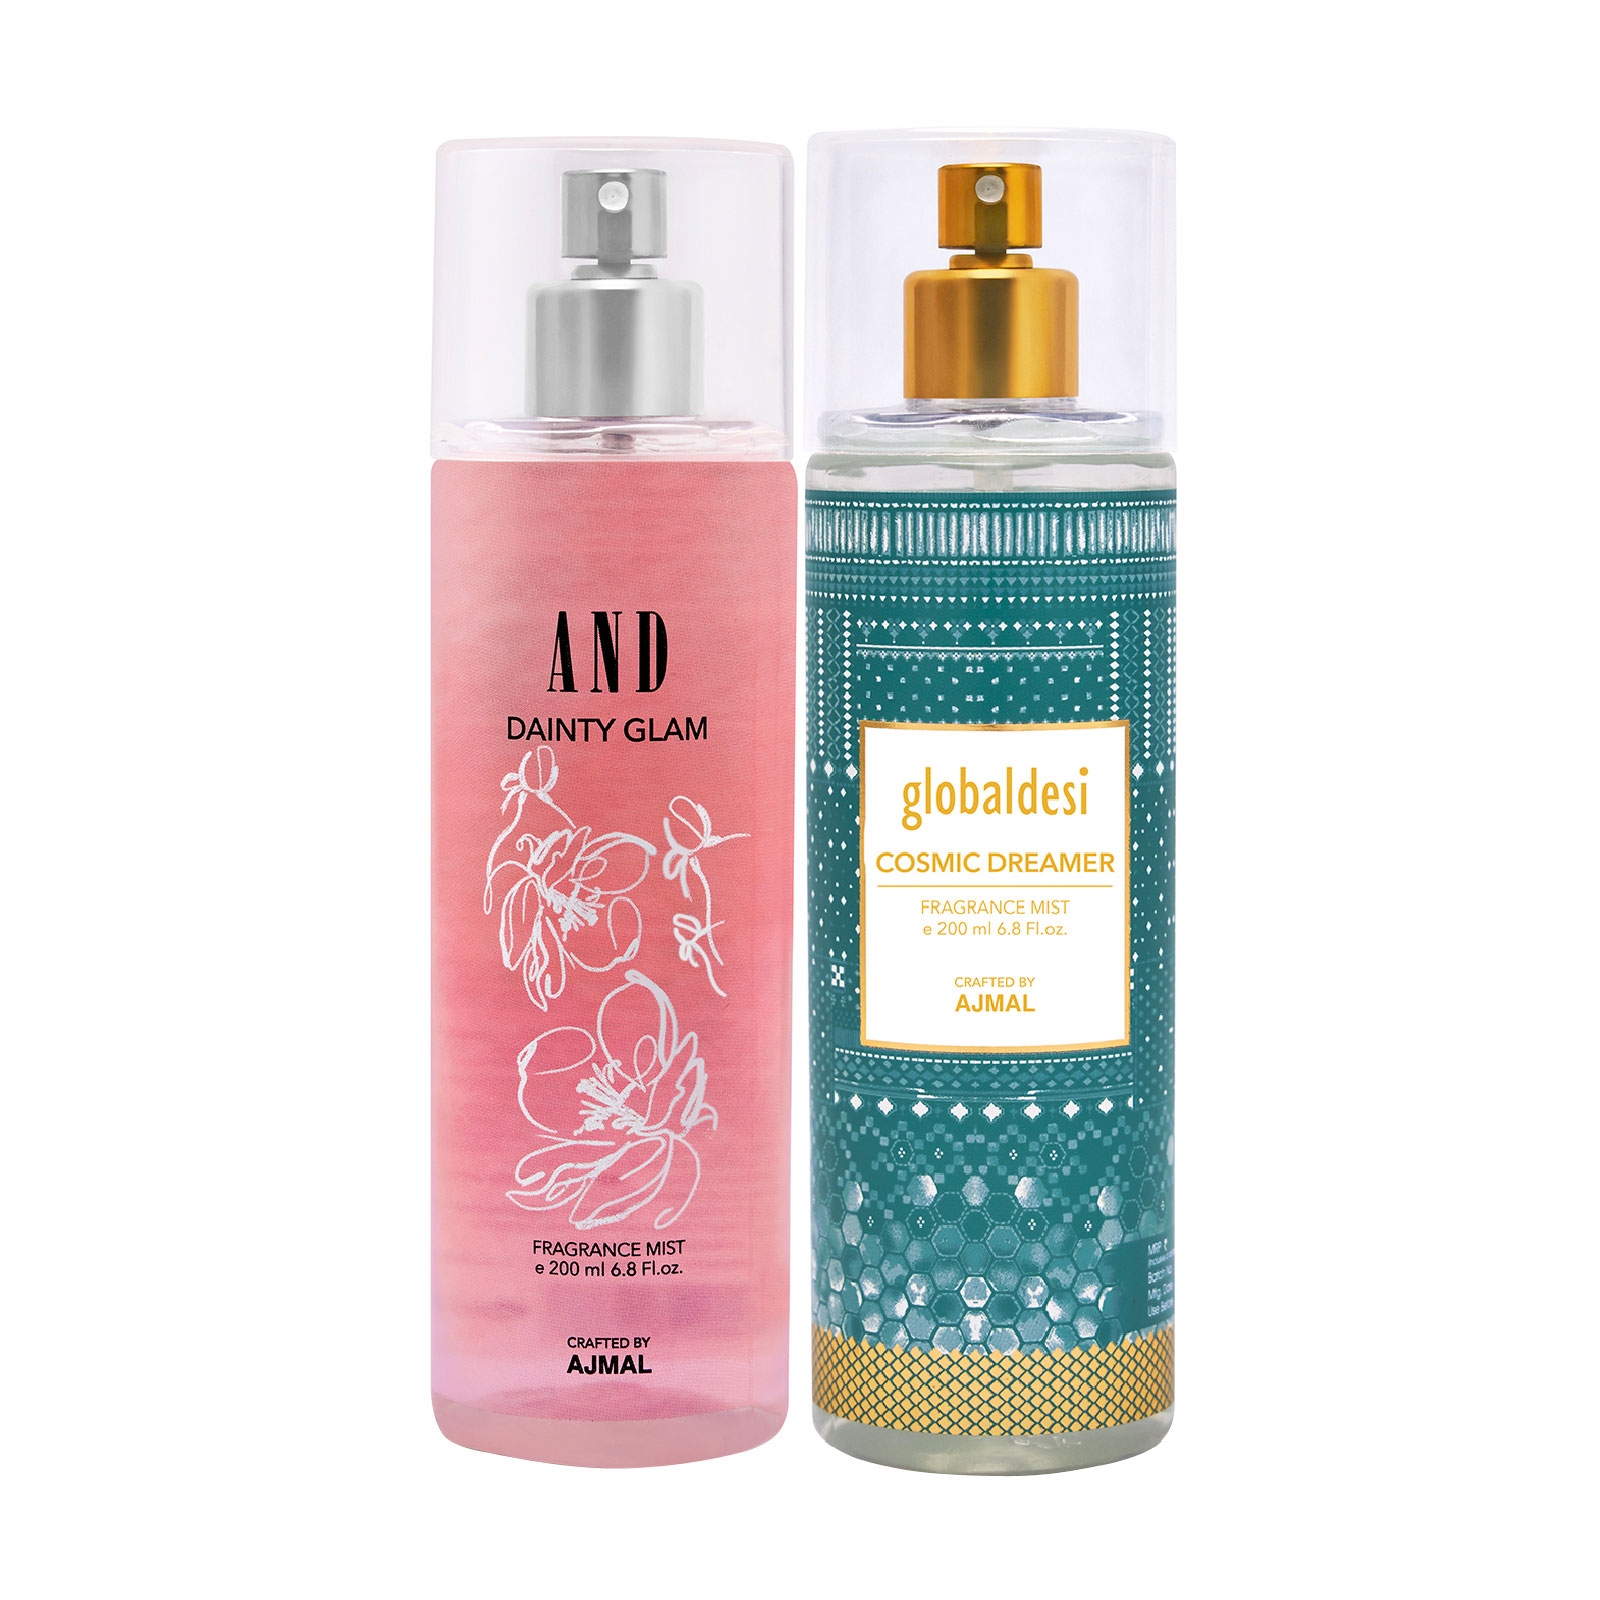 AND Crafted By Ajmal | AND Dainty Glam Body Mist 200ML & Global Desi Cosmic Dreamer Body Mist 200ML 